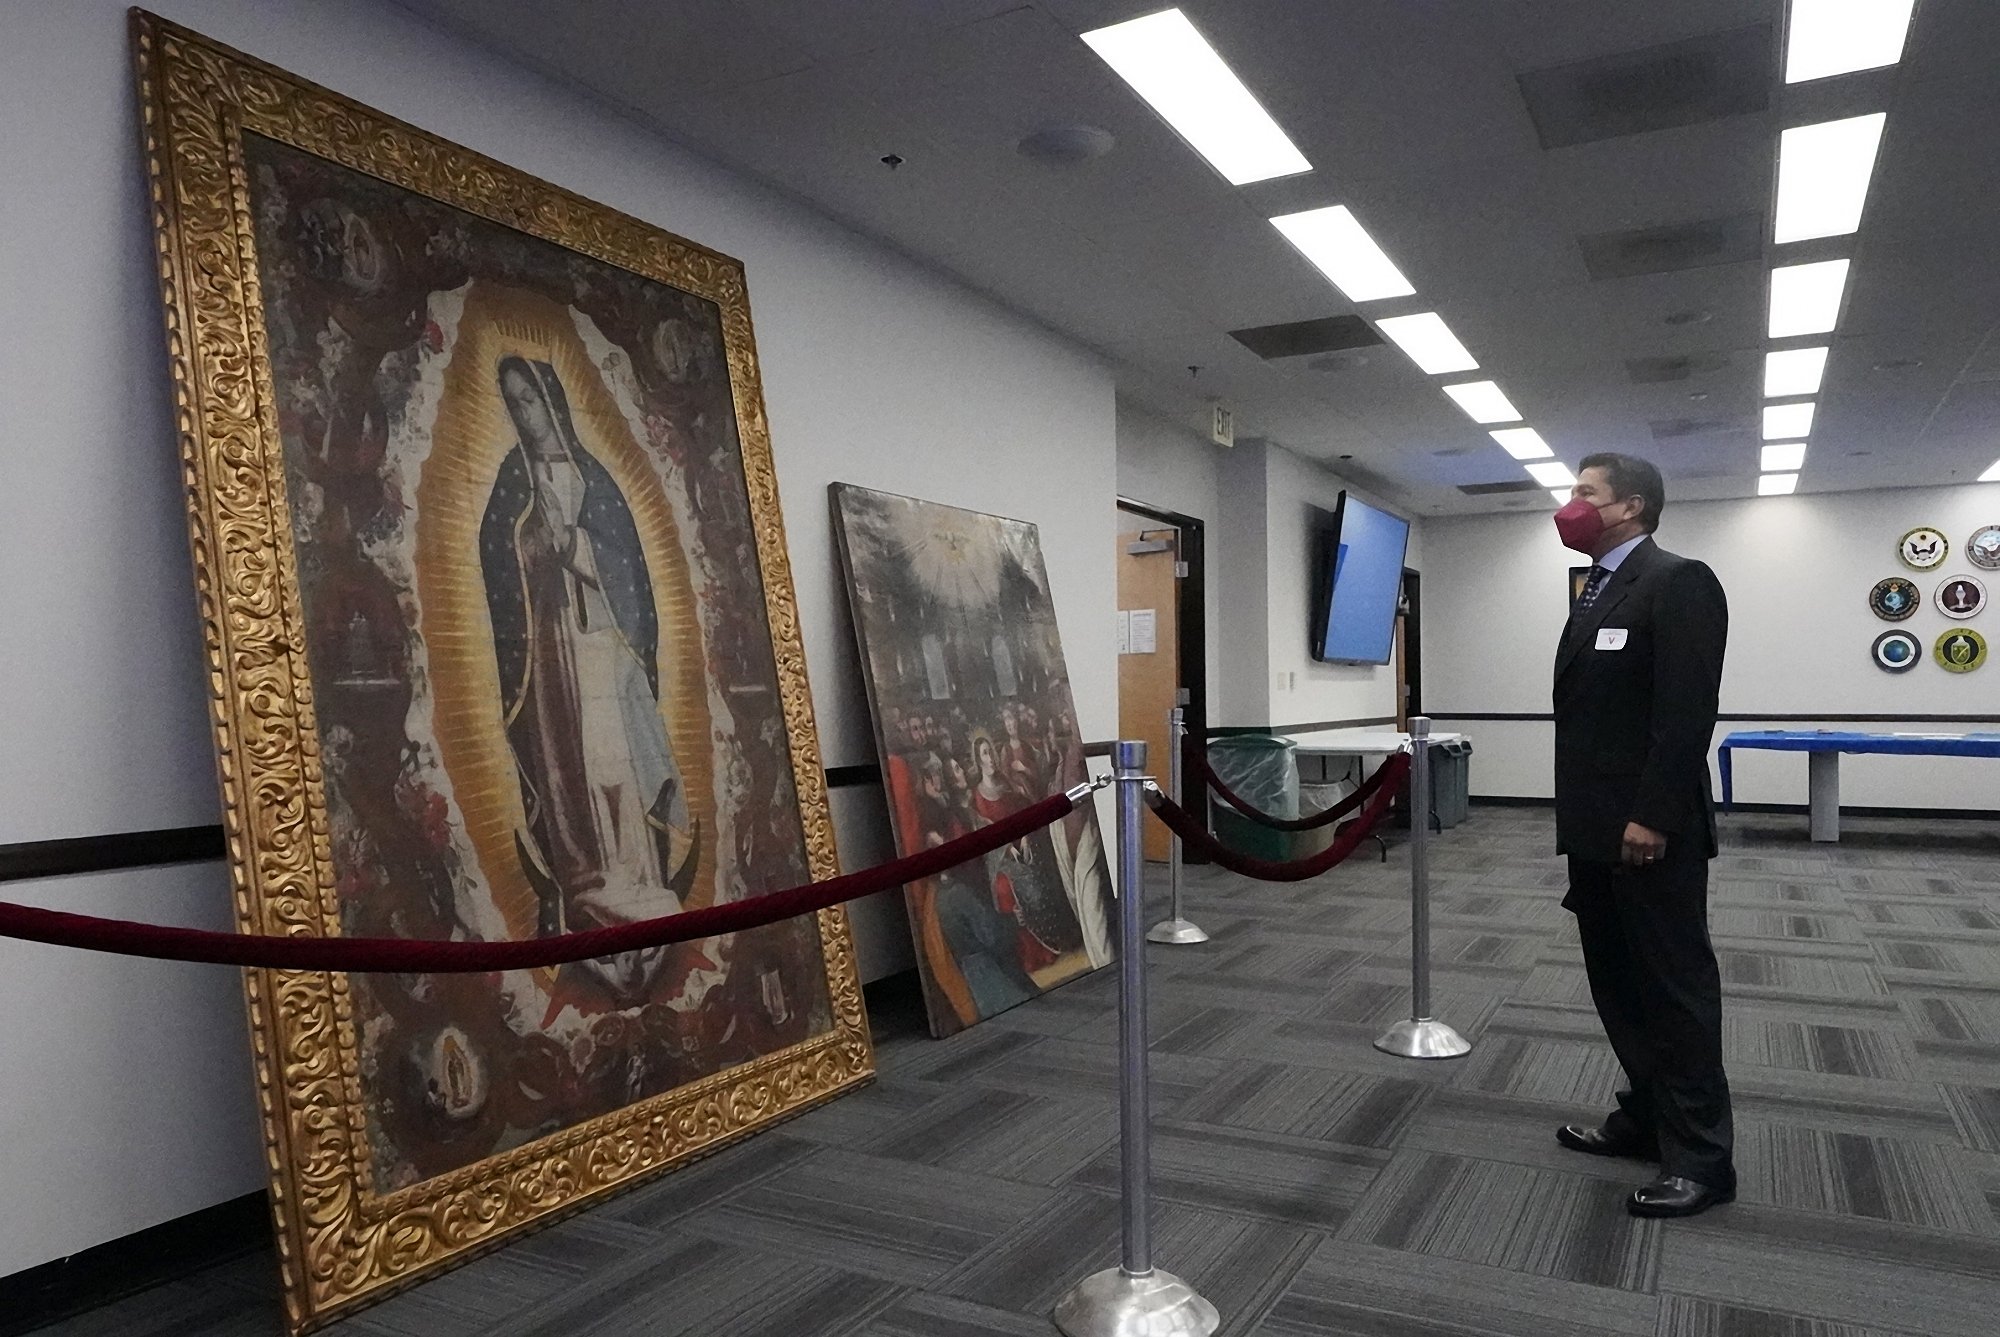 Jose Luis Chavez Gonzales, Consul General, Peruvian Consulate in Los Angeles, admires recovered Peruvian paintings following investigations by the FBI's Art Crime Team at the FBI headquarters, 